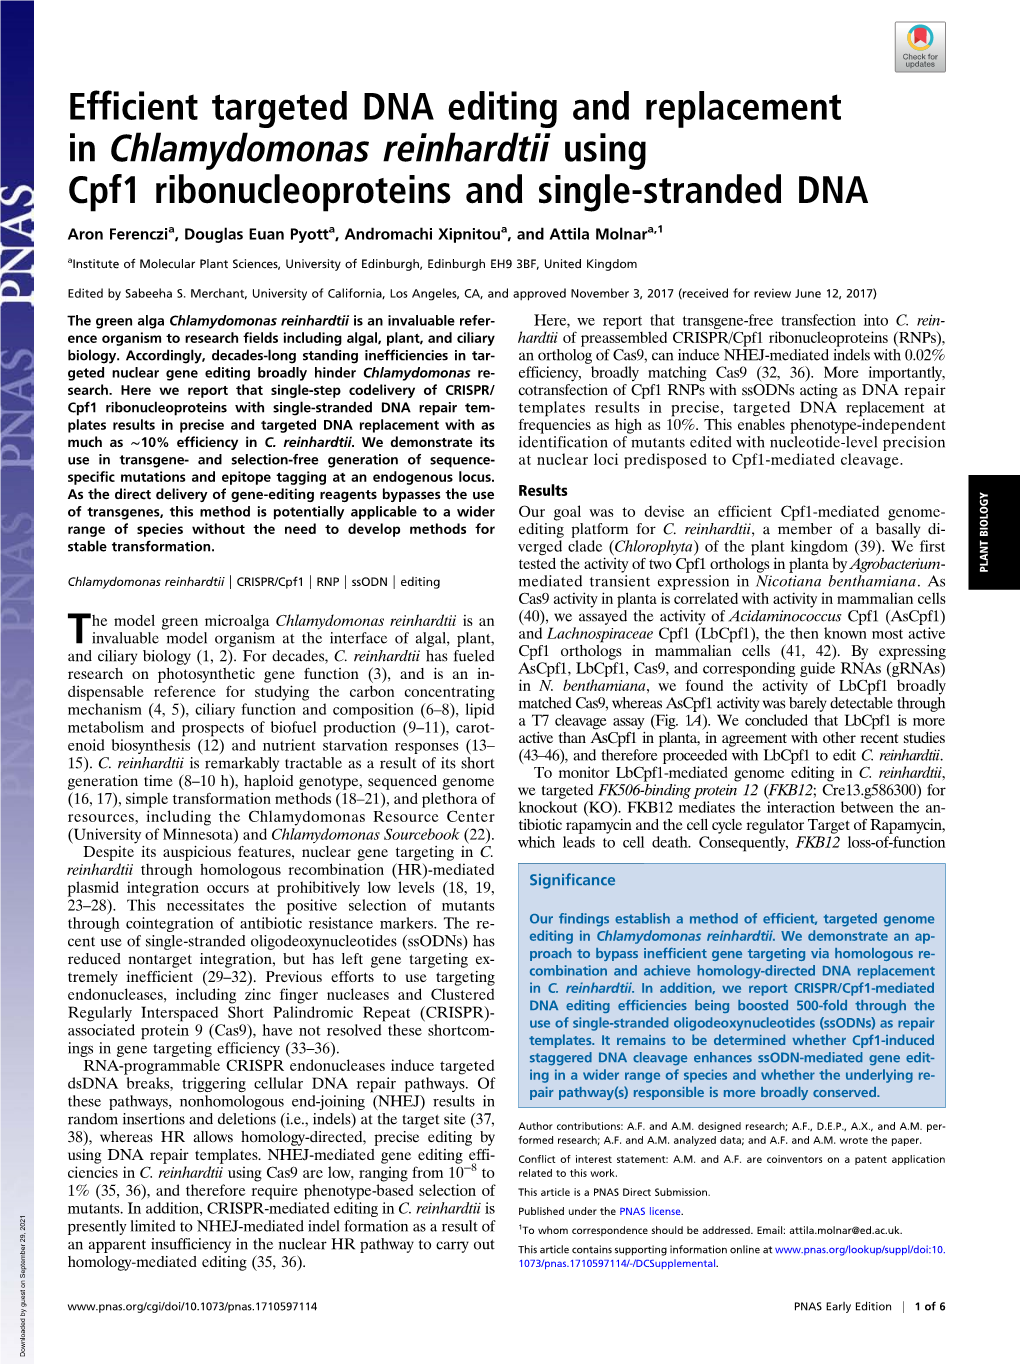 Efficient Targeted DNA Editing and Replacement in Chlamydomonas Reinhardtii Using Cpf1 Ribonucleoproteins and Single-Stranded DNA